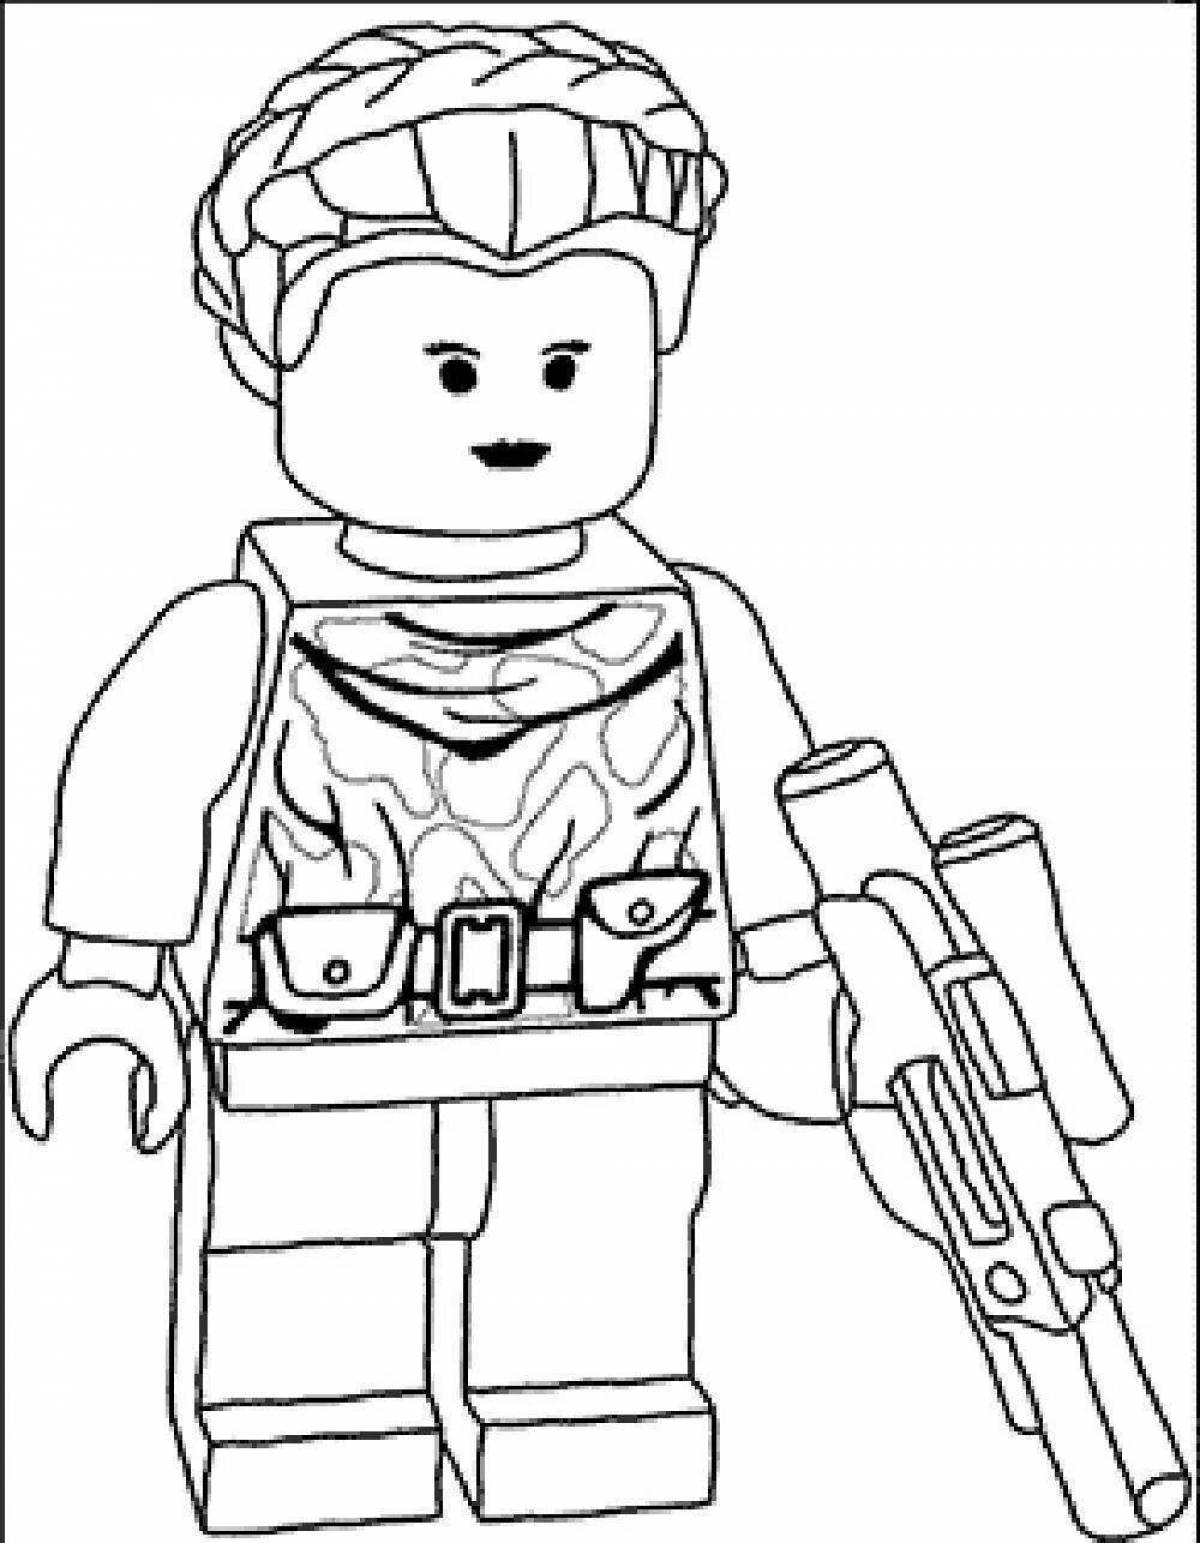 Glorious military soldiers coloring pages for boys